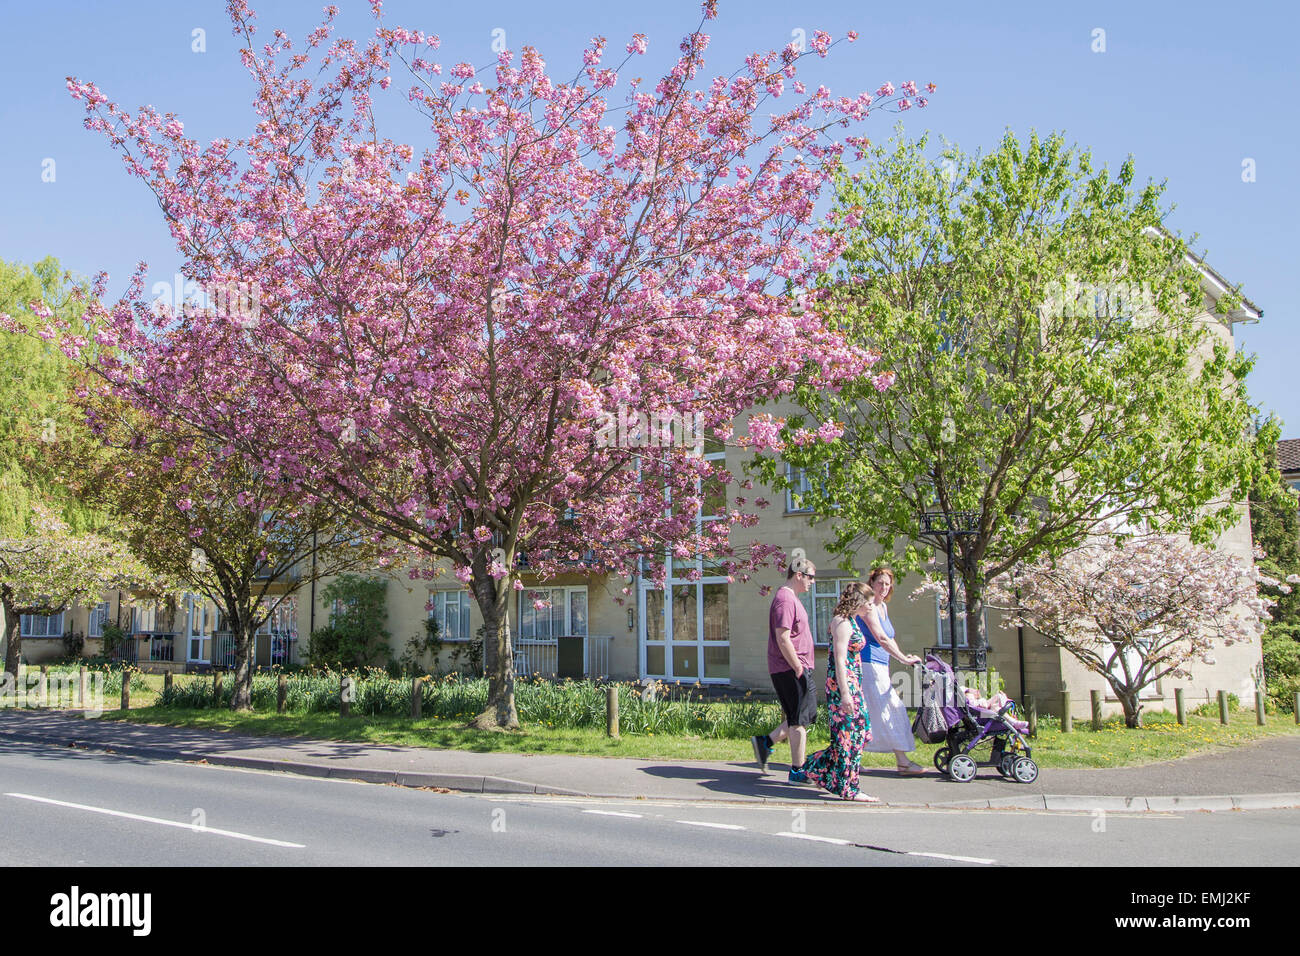 Corsham, UK. 21st Apr, 2015. The historic town of Corsham was the setting for the recent BBC drama Poldark. This Spring it is also home to a beautiful display of cherry blossom. Credit:  Wayne Farrell/Alamy Live News Stock Photo